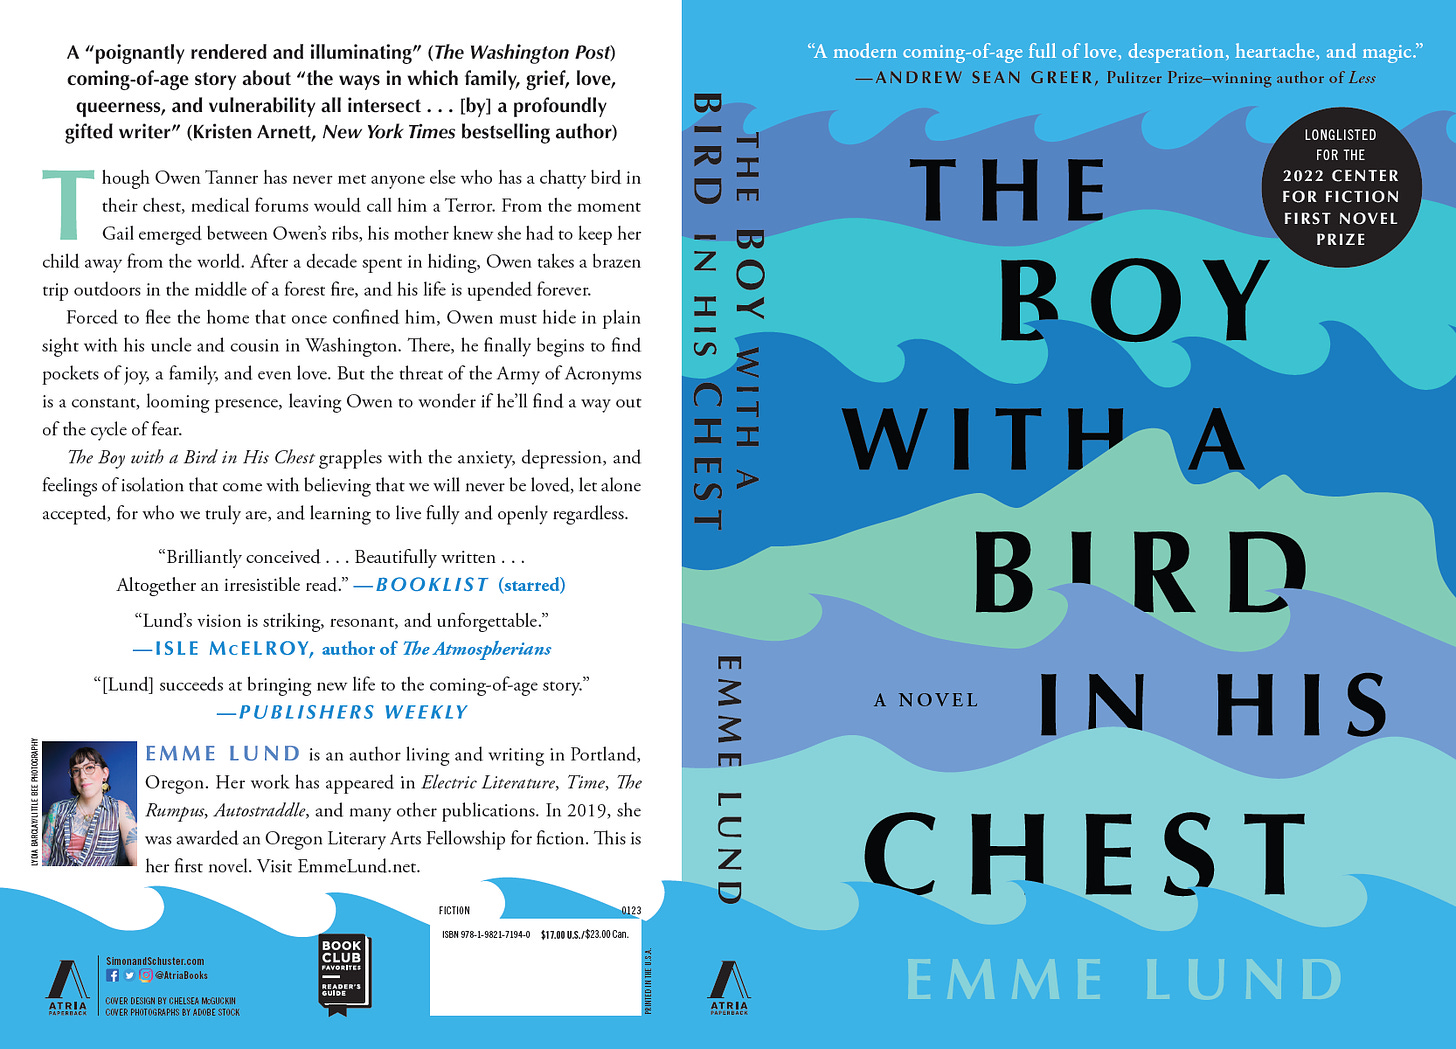 The paperback cover of the boy with a bird in his chest